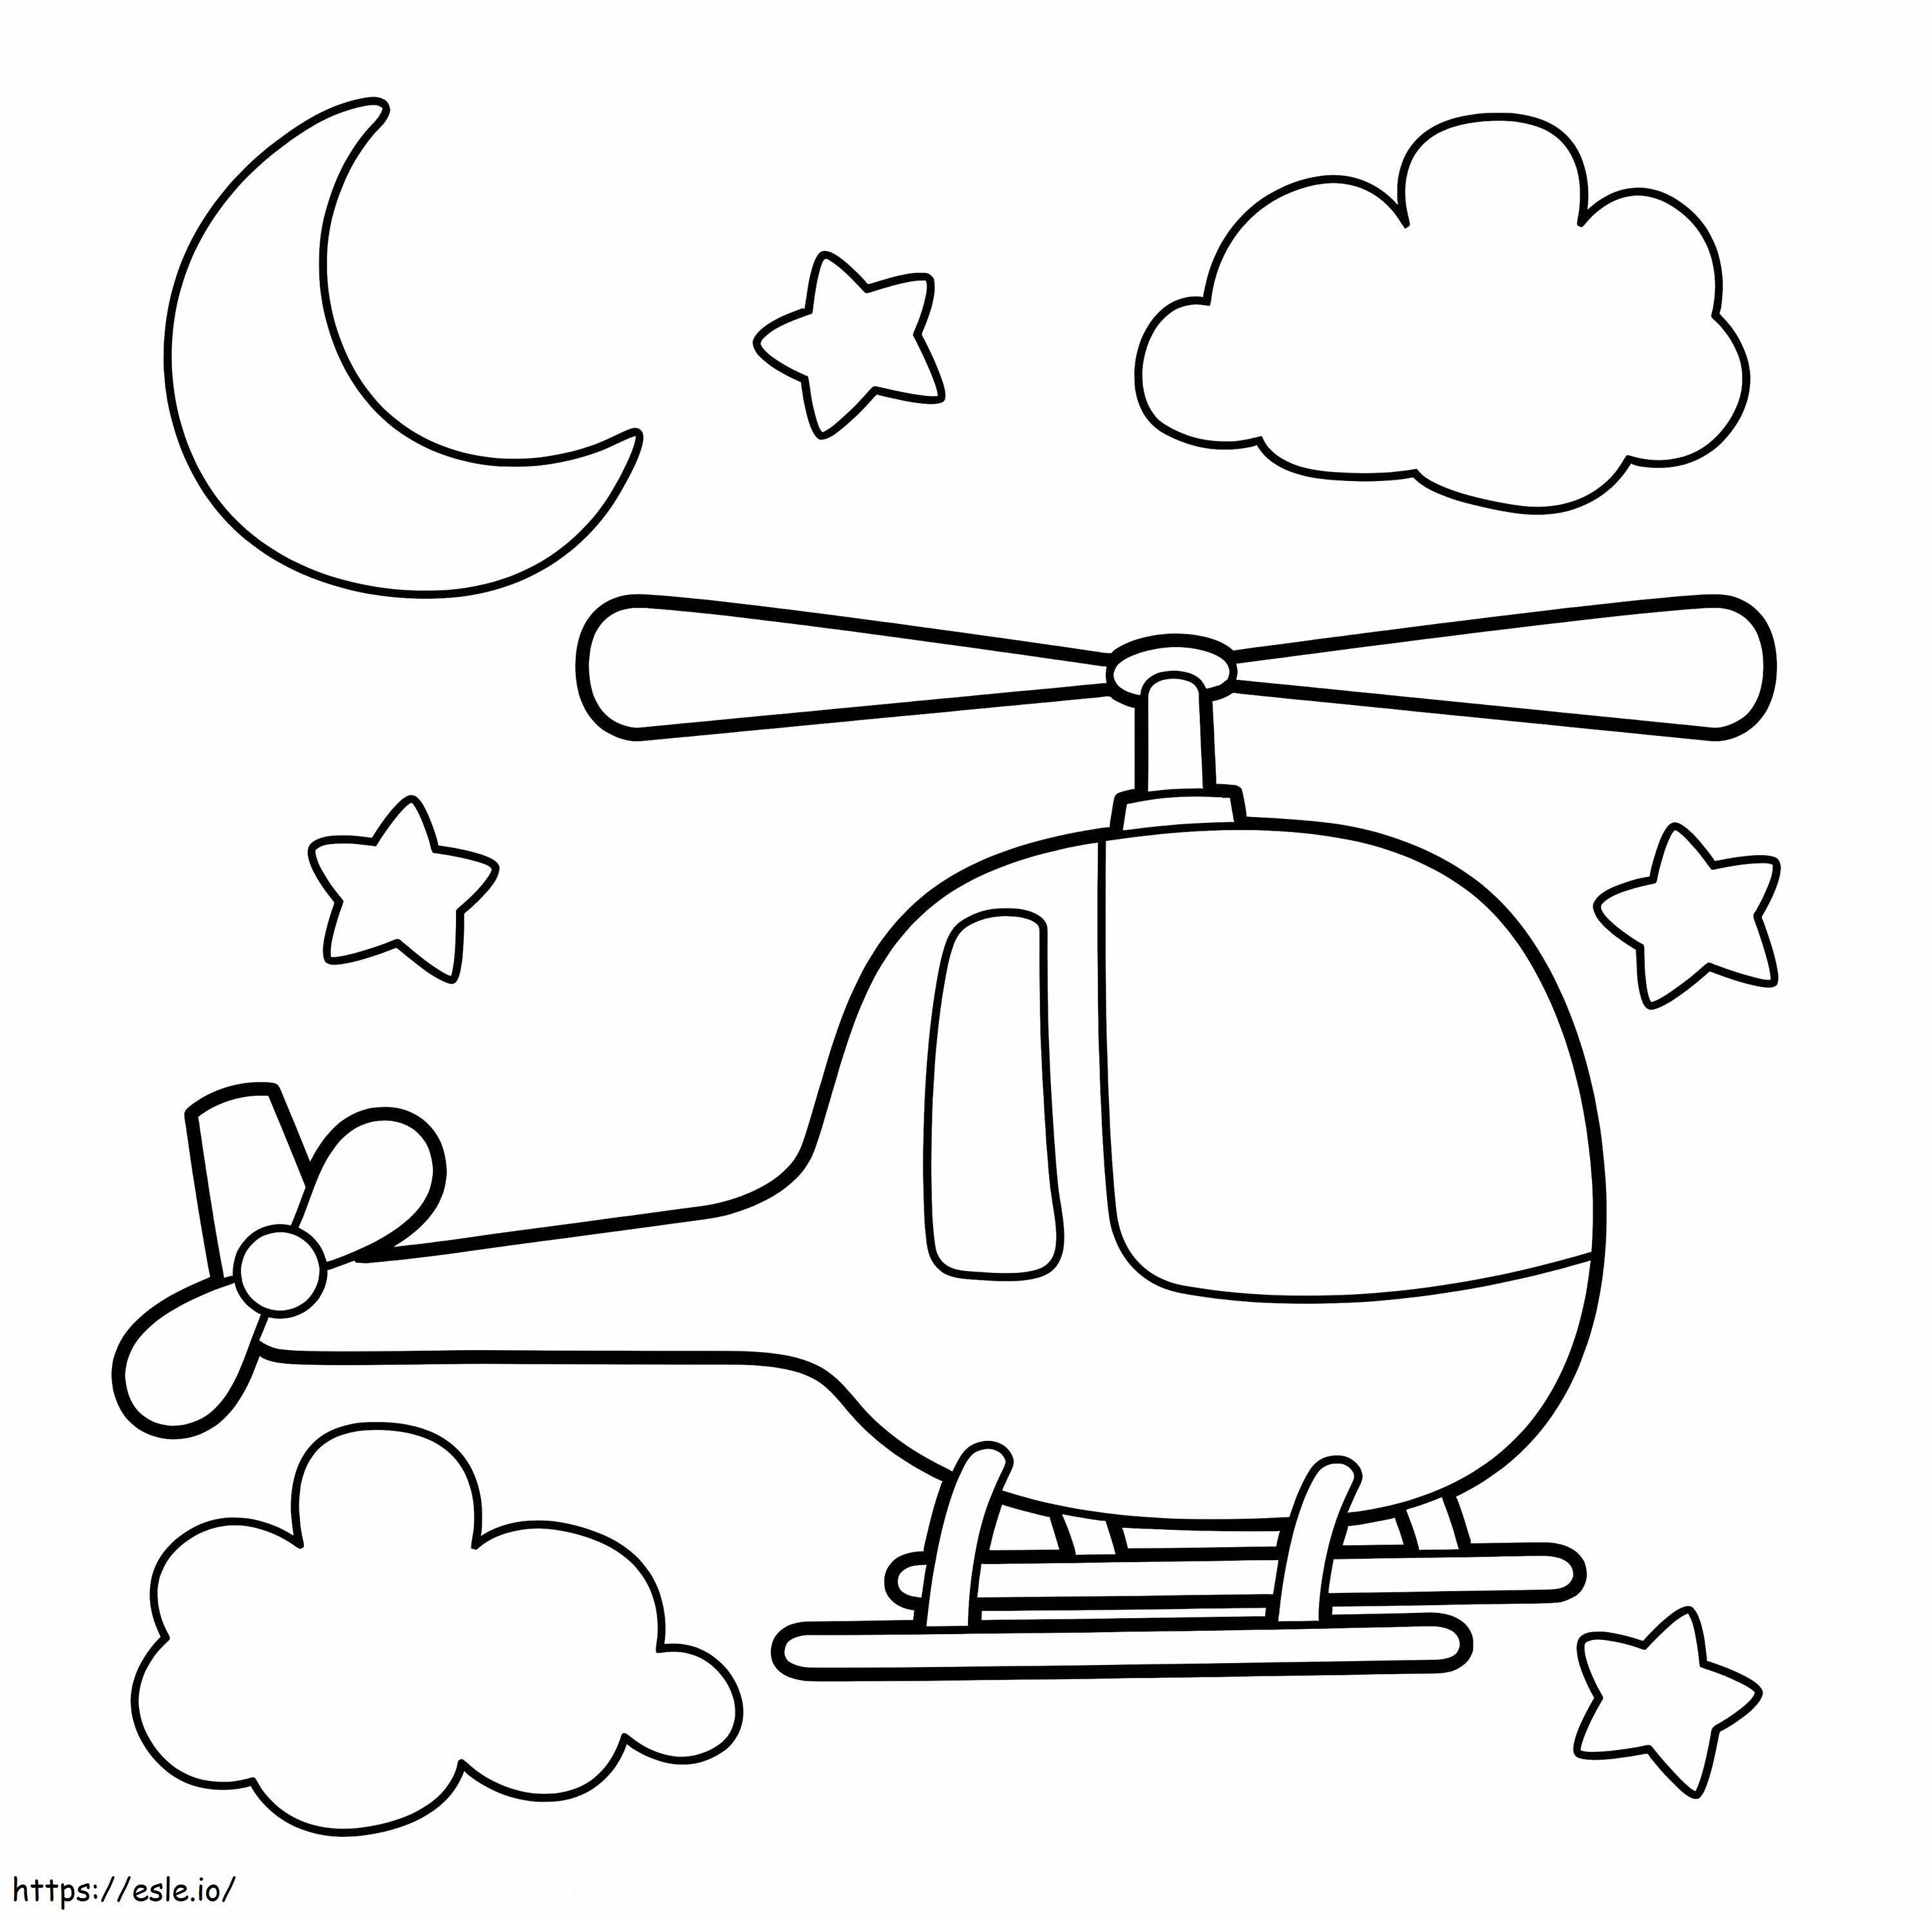 Basic Helicopter coloring page